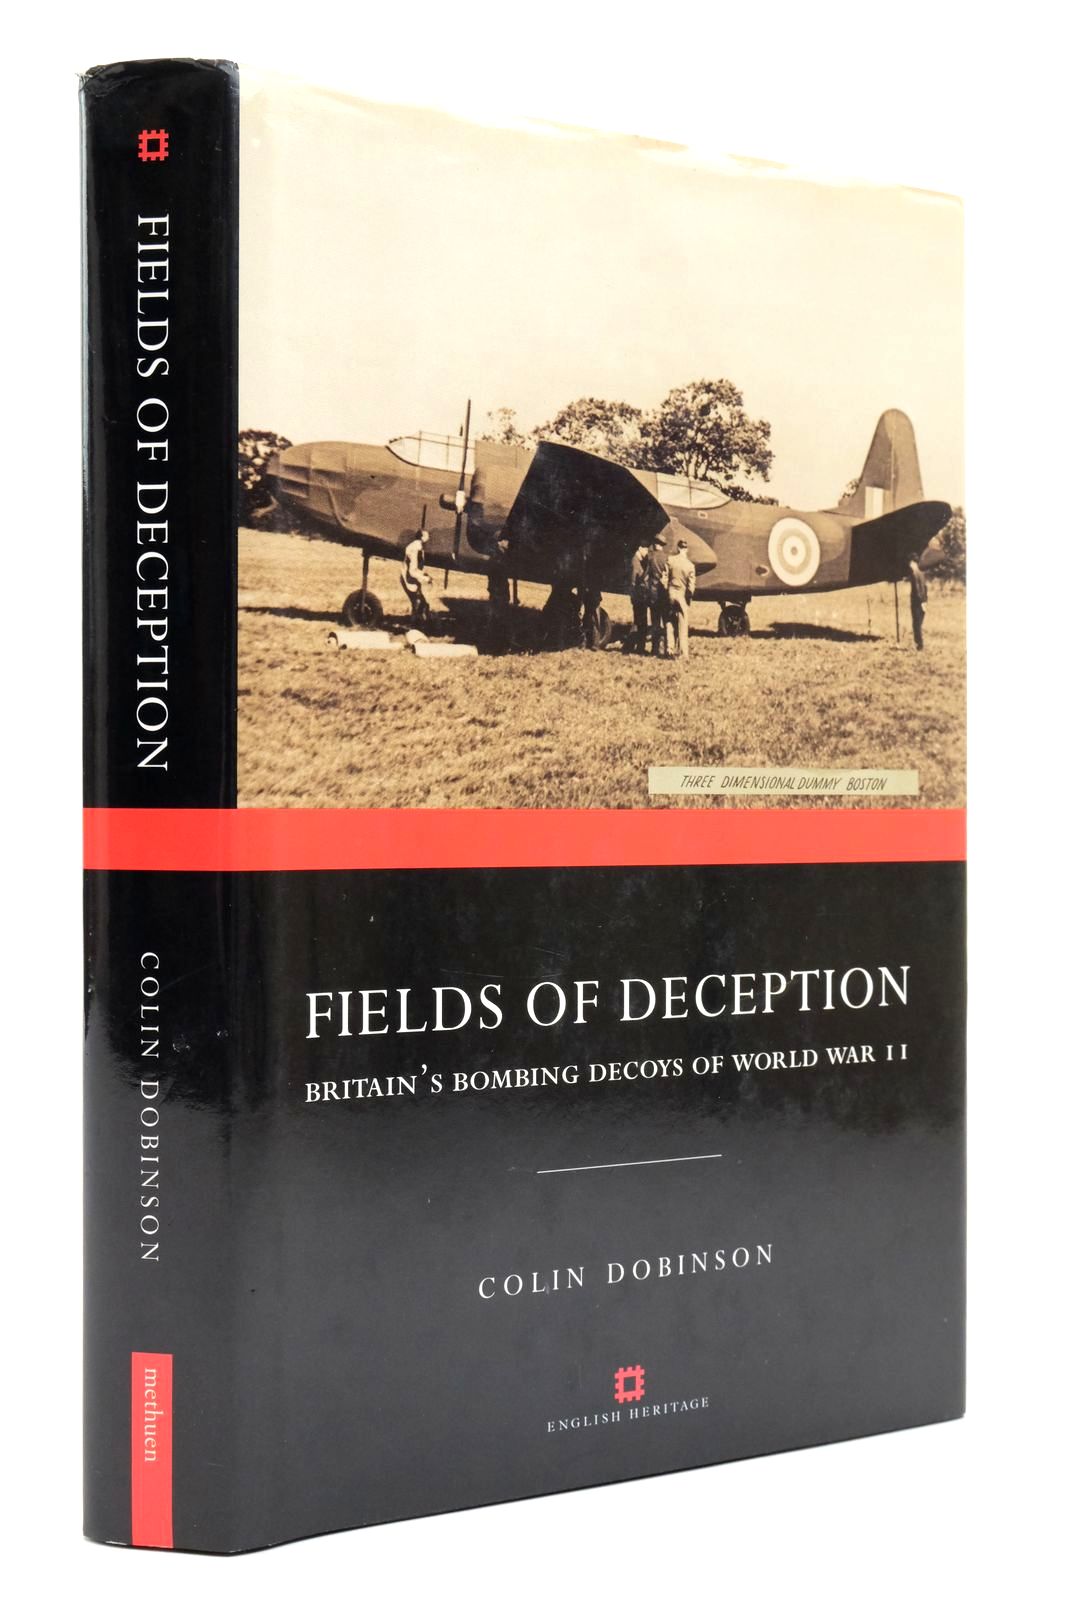 Photo of FIELDS OF DECEPTION: BRITAIN'S BOMBING DECOYS OF WORLD WAR II written by Dobinson, Colin published by Methuen (STOCK CODE: 2138830)  for sale by Stella & Rose's Books